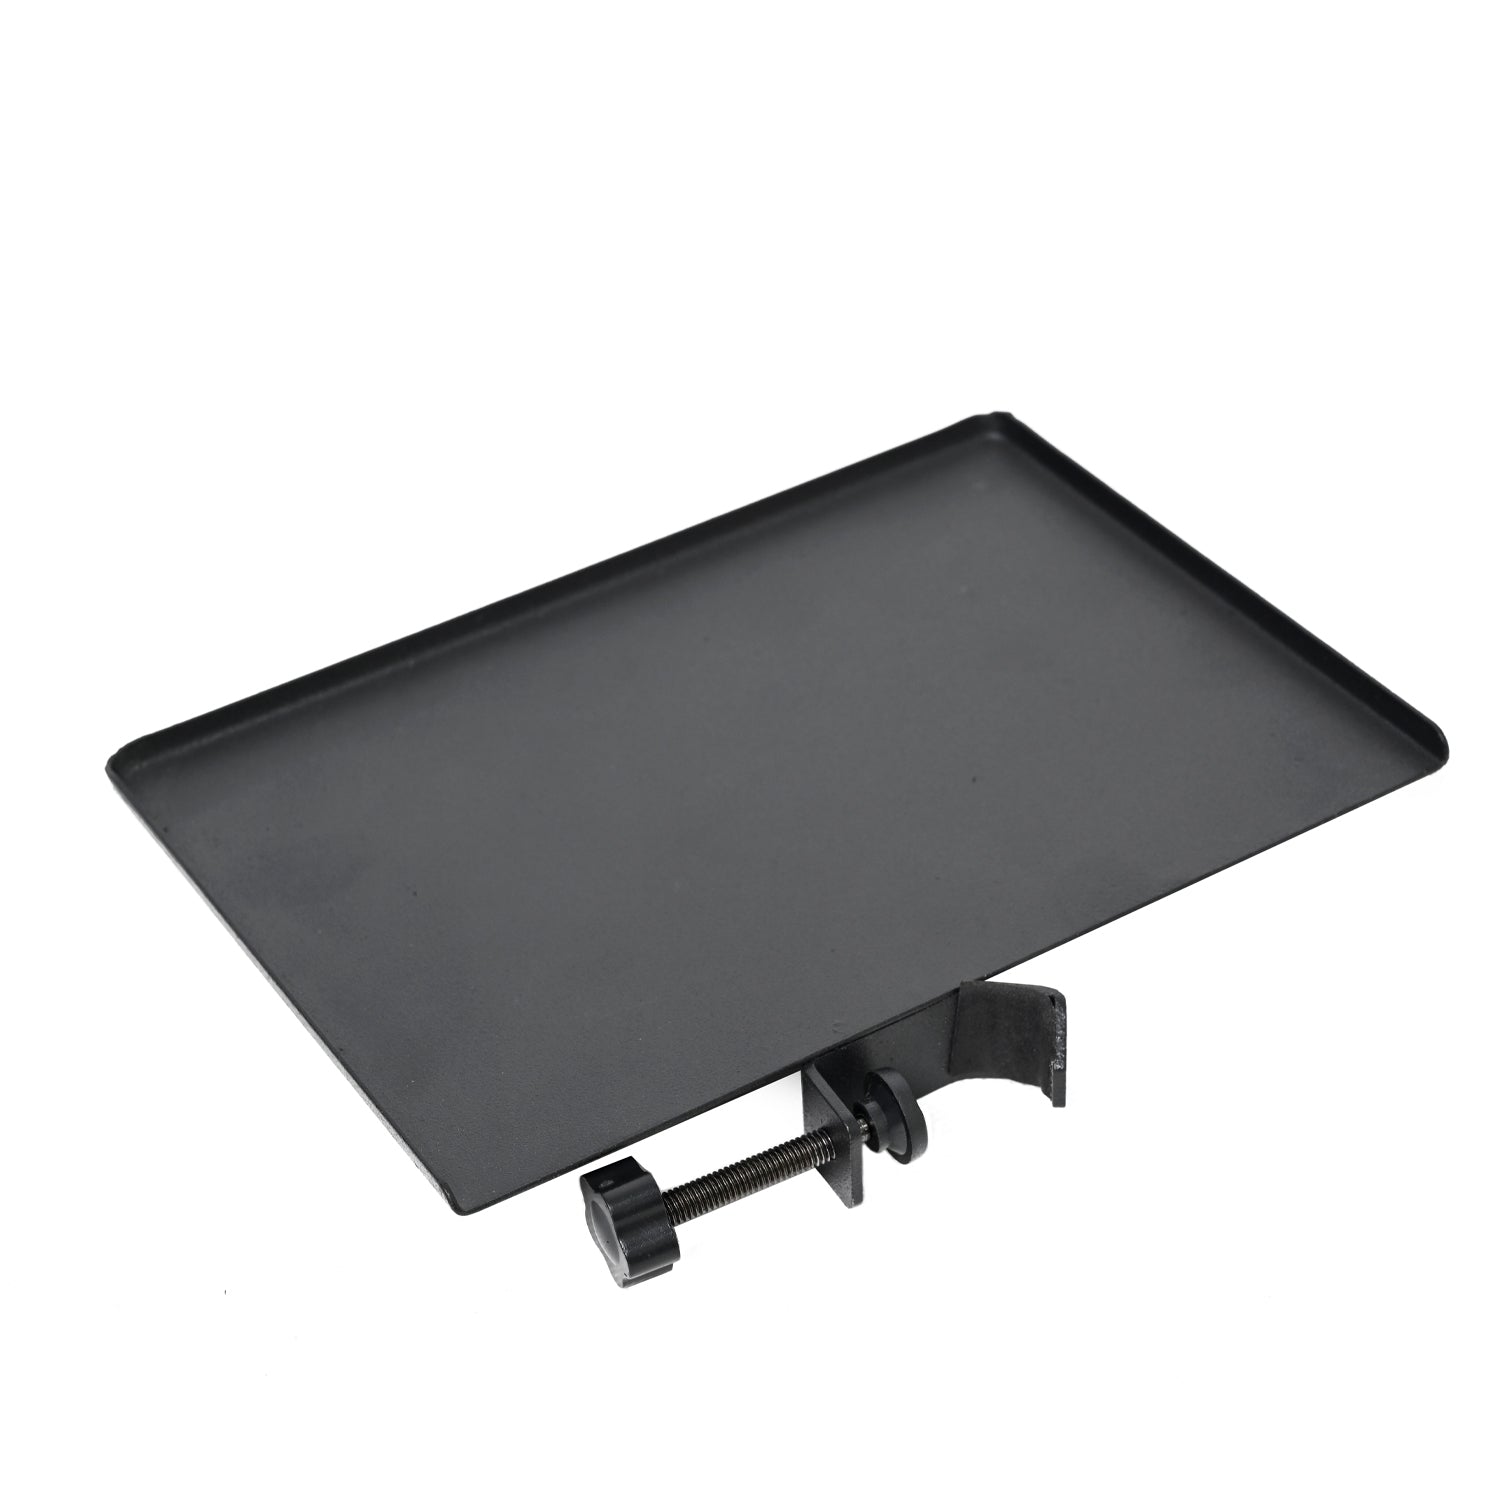 Metal Tray Small for Studio Light Stands